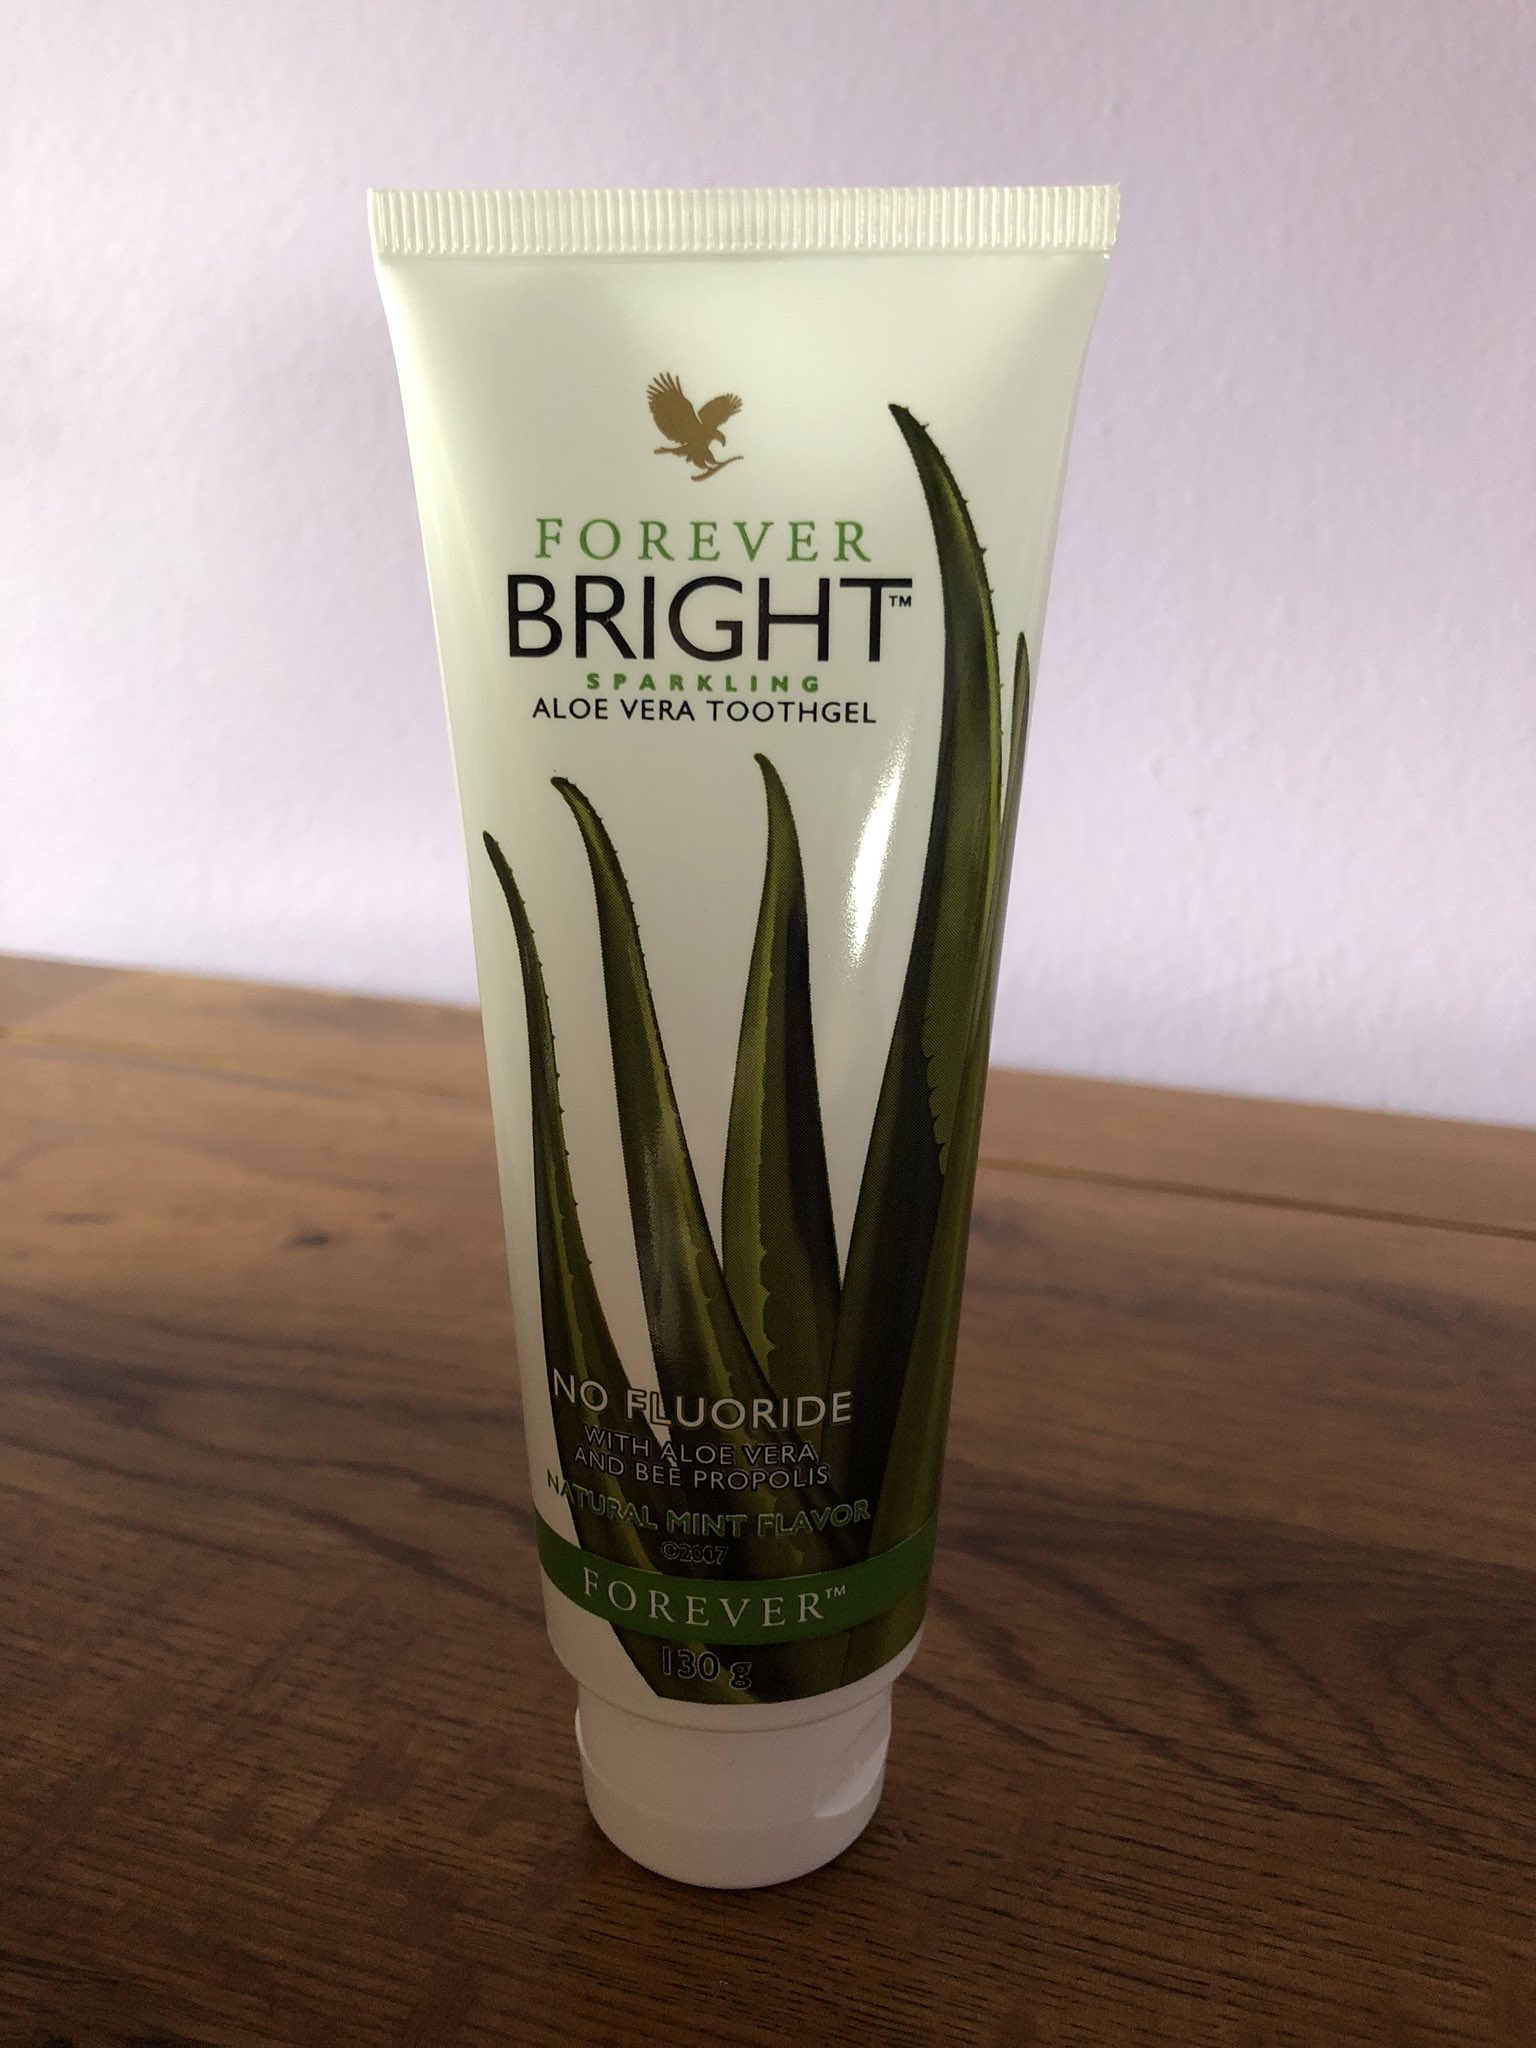 Jo's Forever Aloe on Twitter: "Forever Bright This gentle, non-fluoride formula contains only highest quality ingredients including aloe Vera & bee propolis. Enjoy a natural mint flavour for a taste